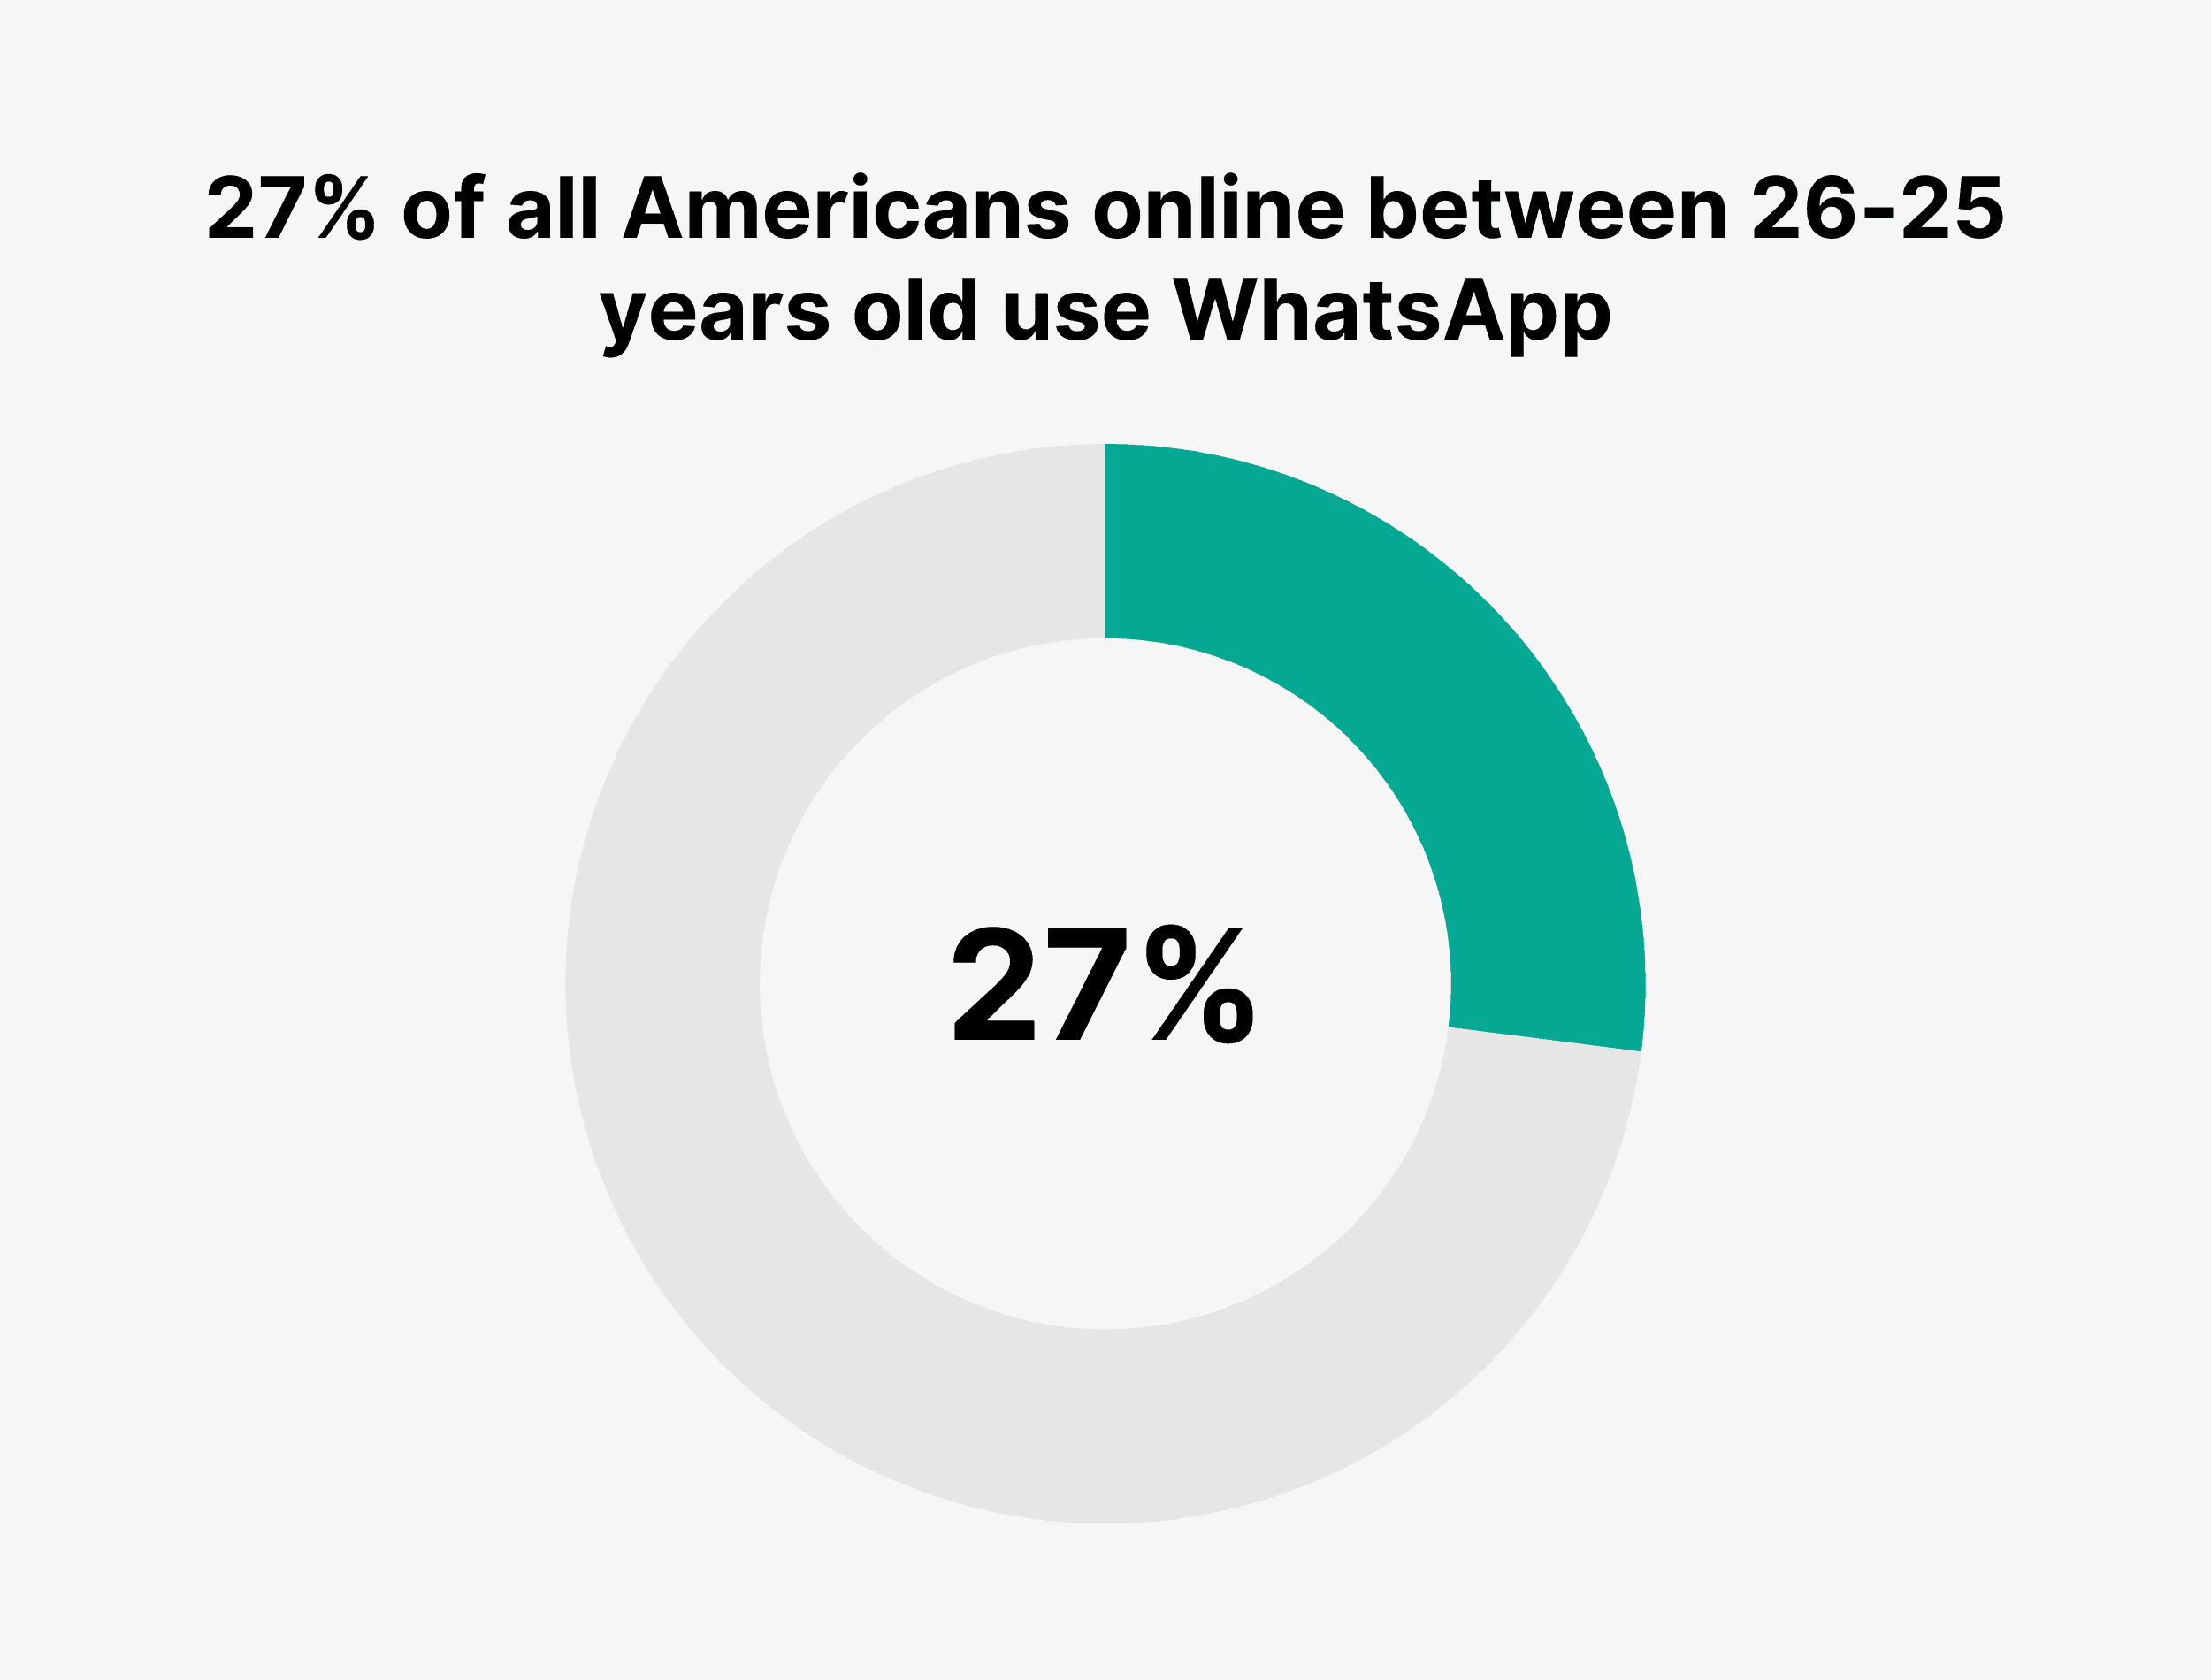 27% of all Americans online between 26-25 years old use WhatsApp